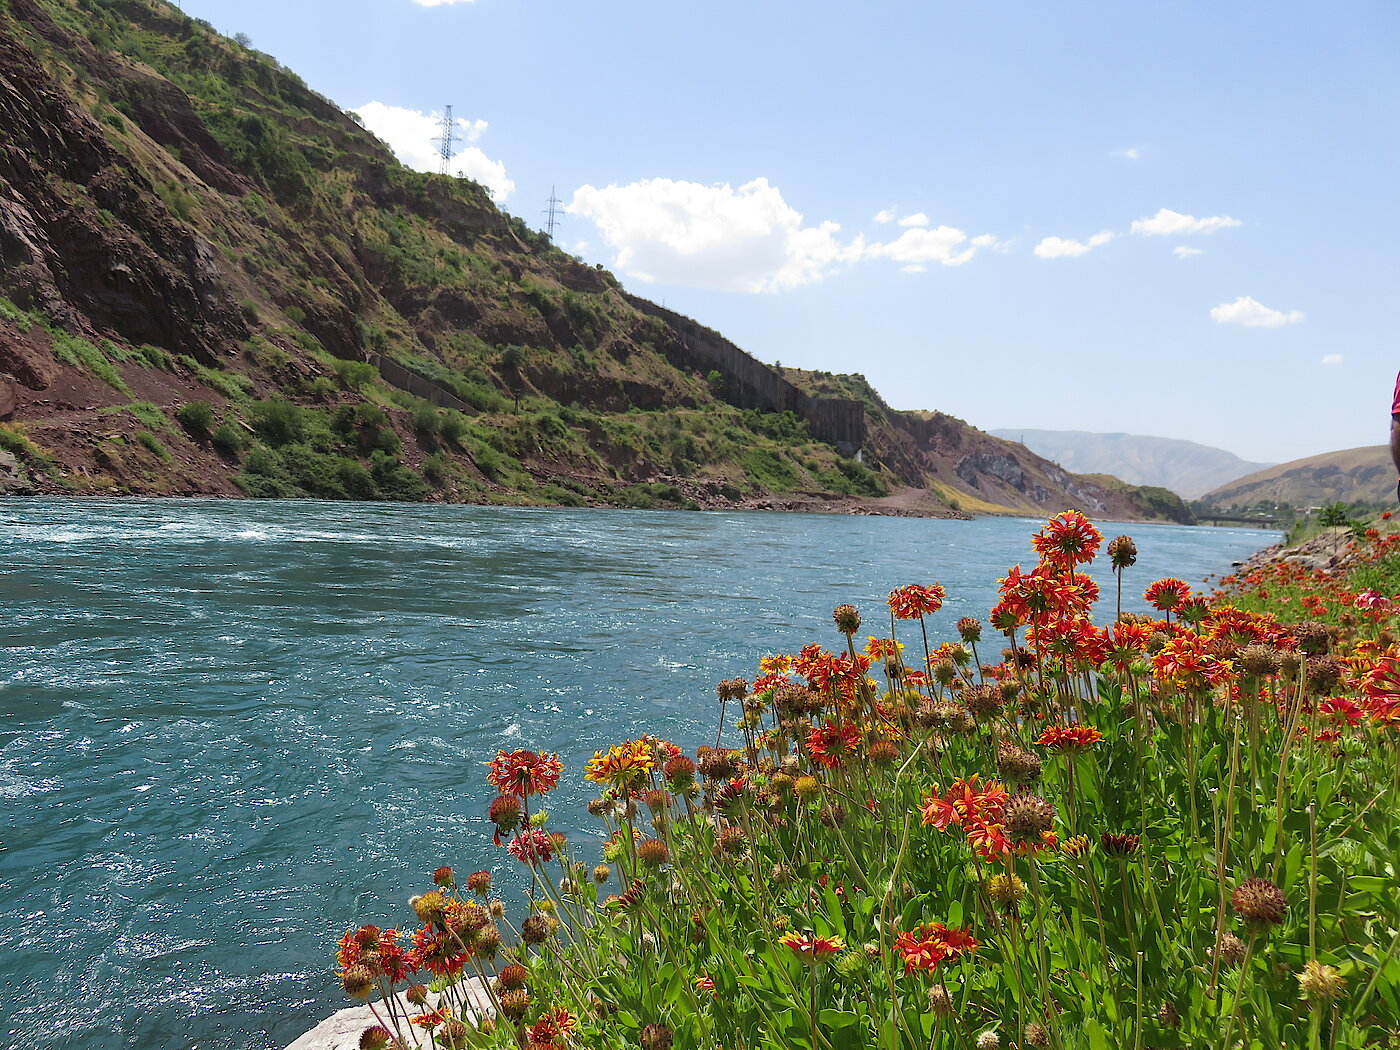 Photo: View of a river with flowers on the bank and hills.